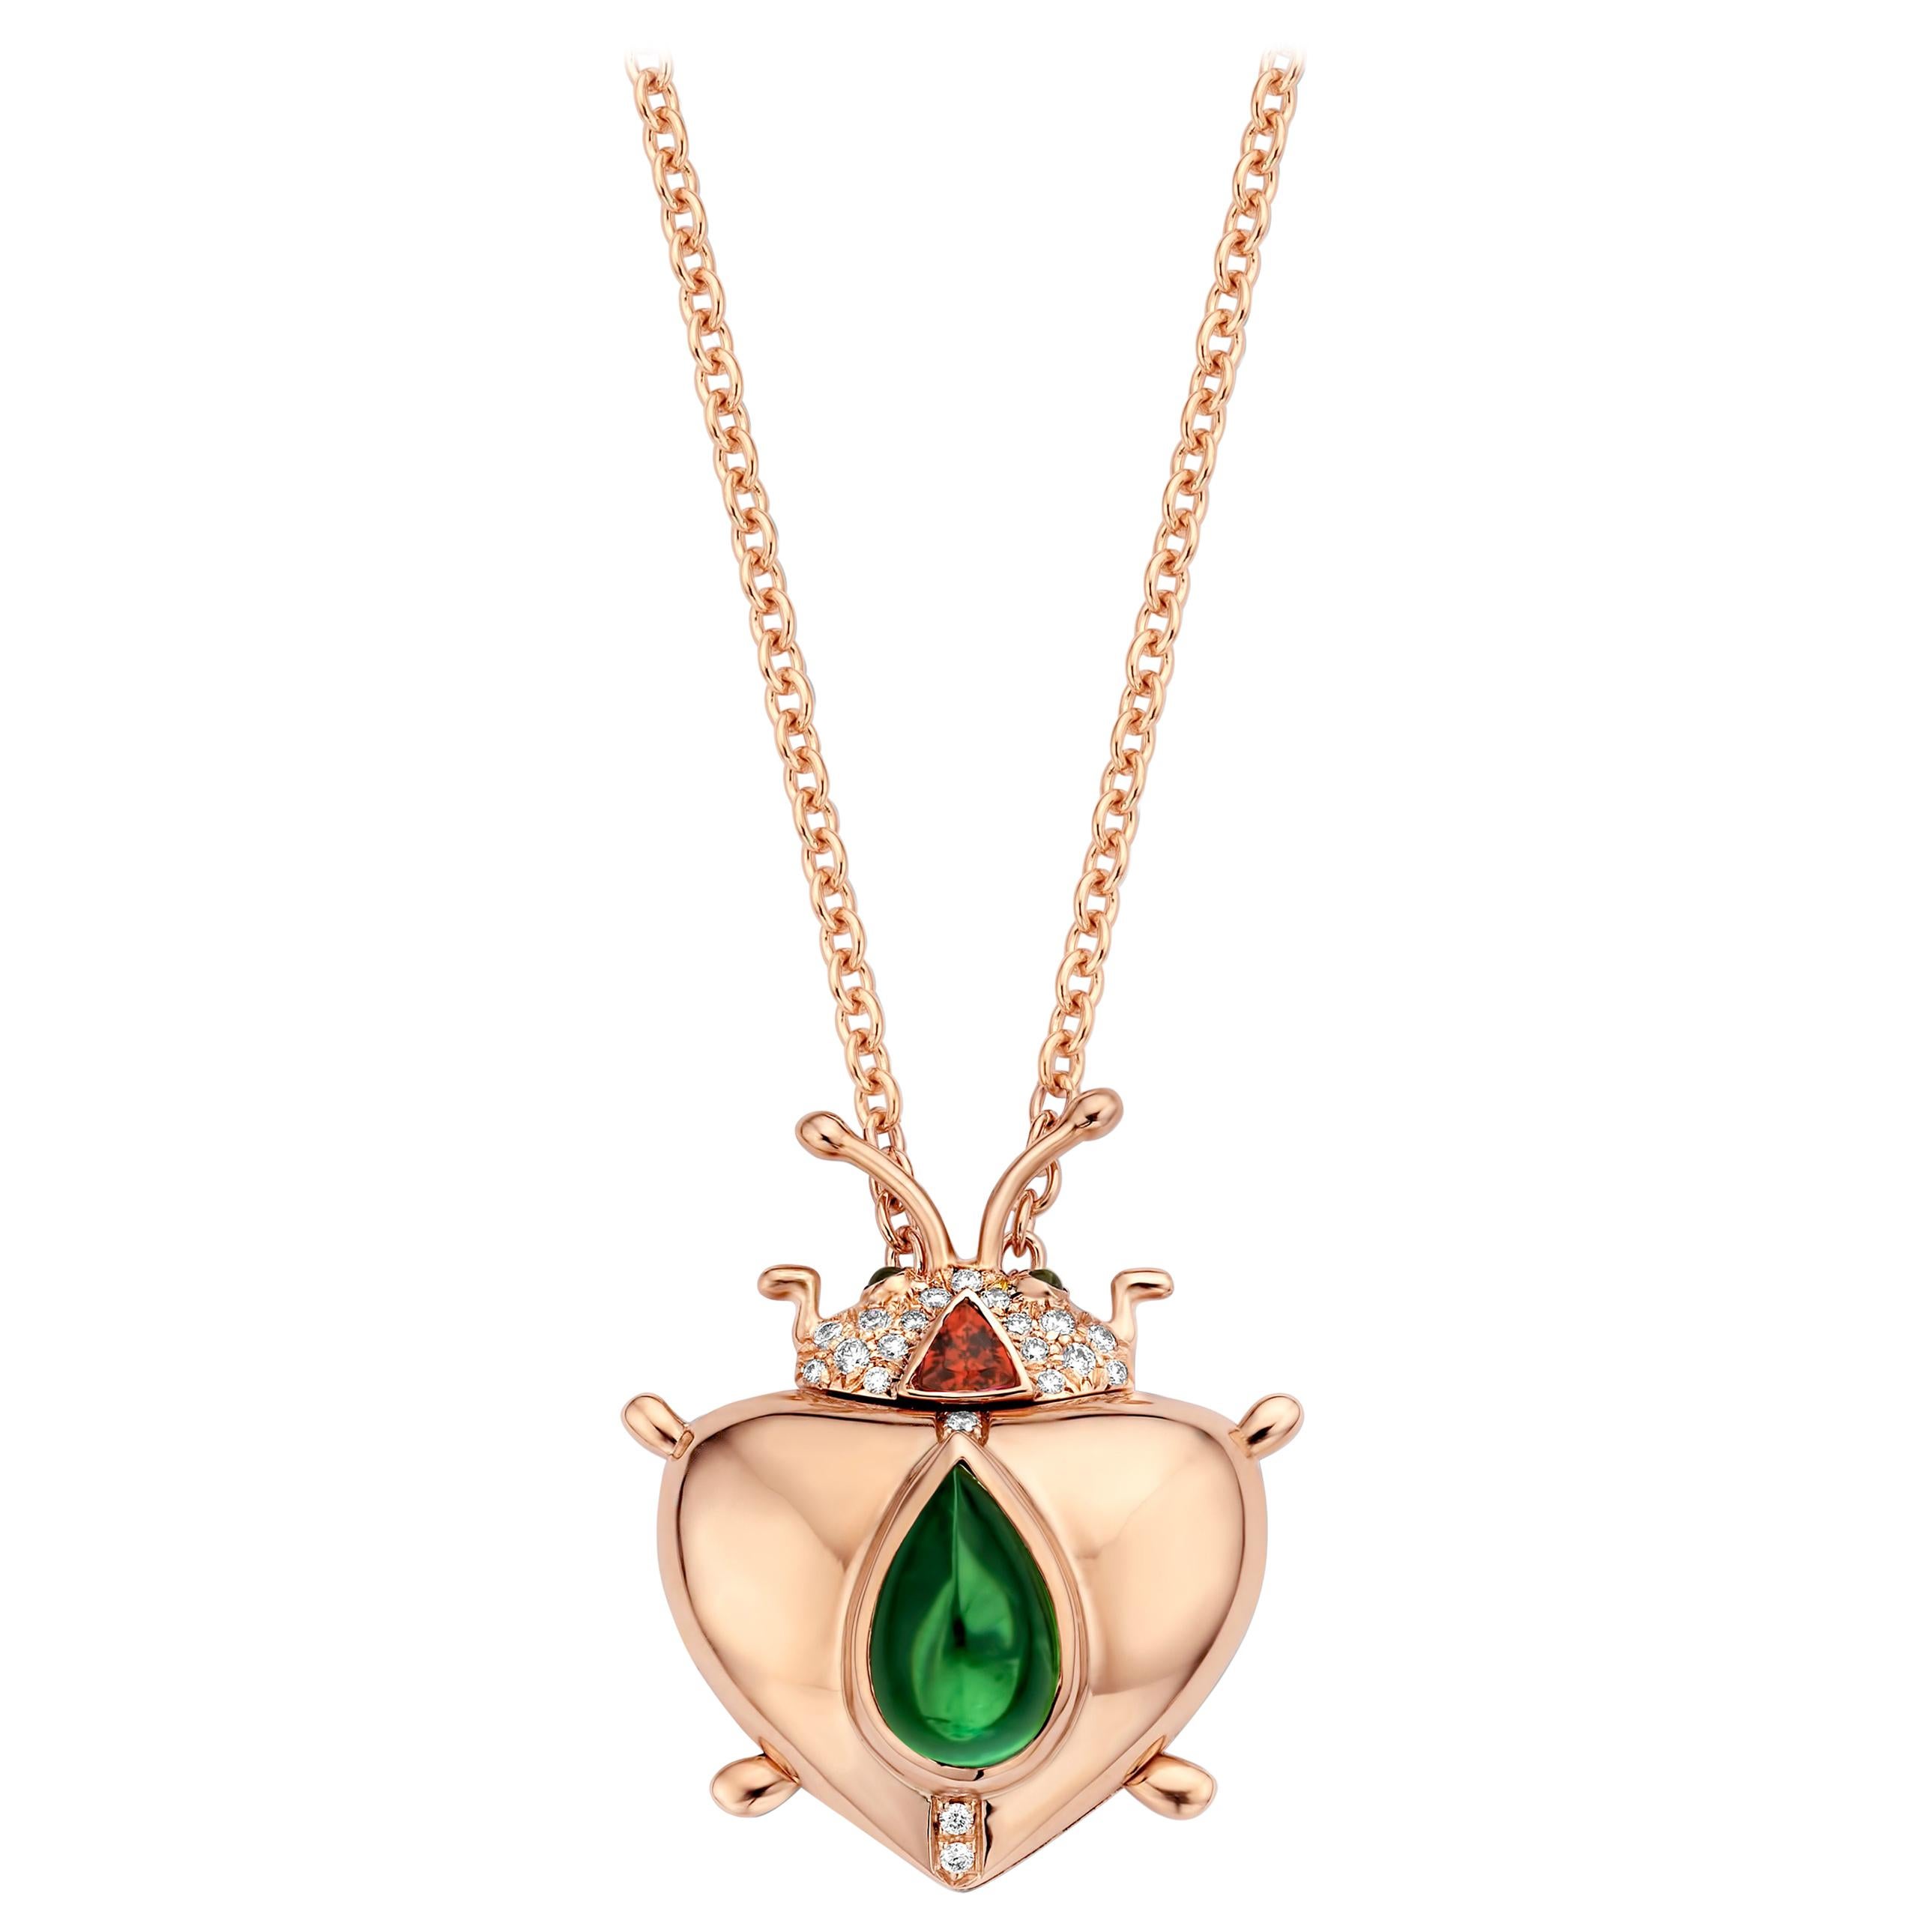 Contemporary 18K Rose Gold Locked Pendant Necklace With Diamonds, Pink & Green Tourmalines For Sale